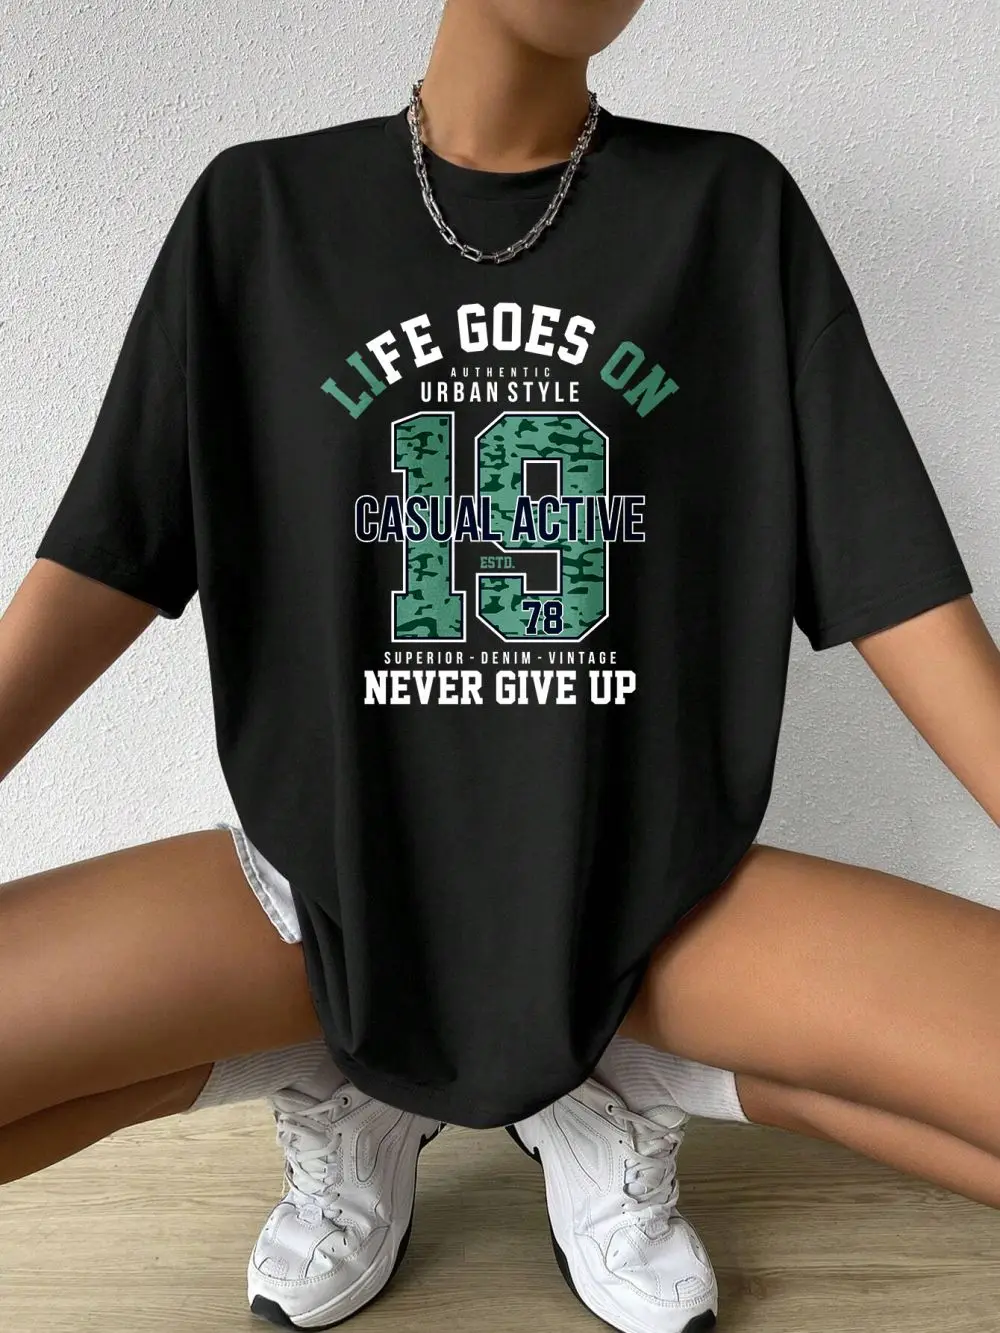 

Life Goes On Urban Style 1987 Never Give Up Printing Woman T-Shirts Cotton Soft Clothes Loose O-Neck Casual Summer Female Tees